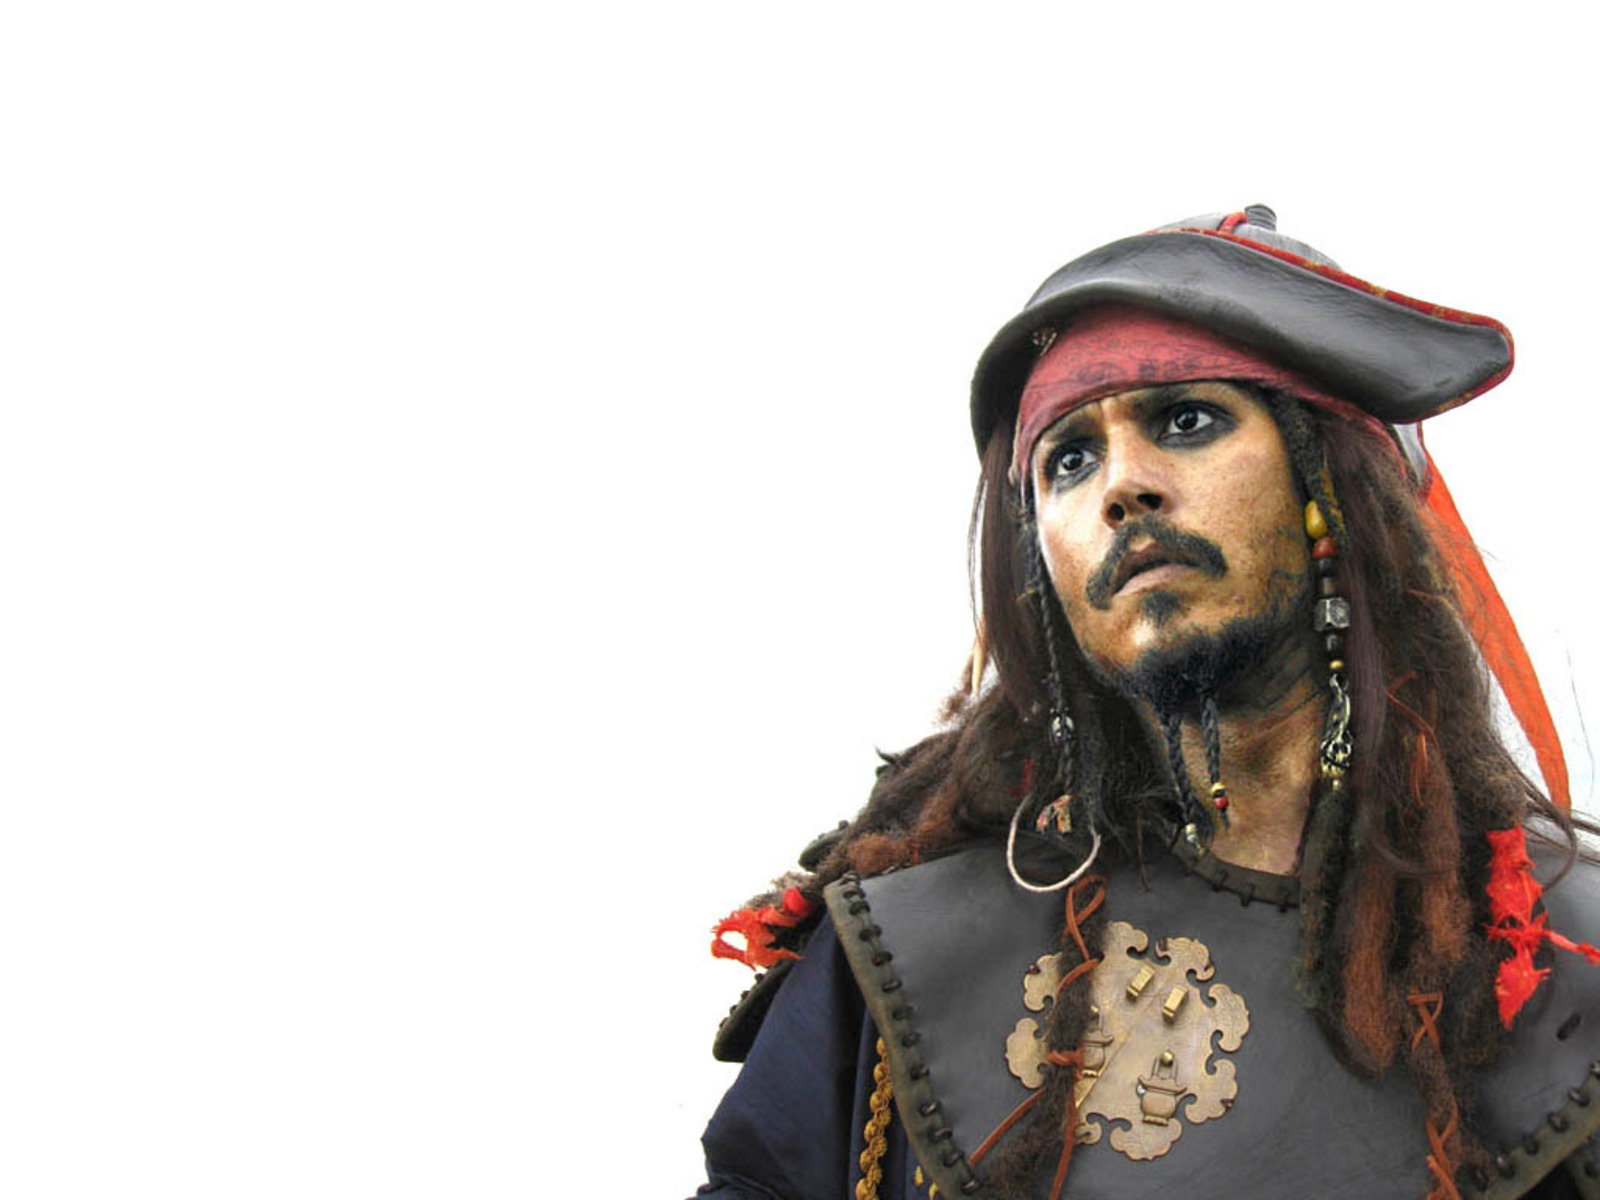 Free 3D Wallpapers Download: Pirates of the caribbean wallpapers ...